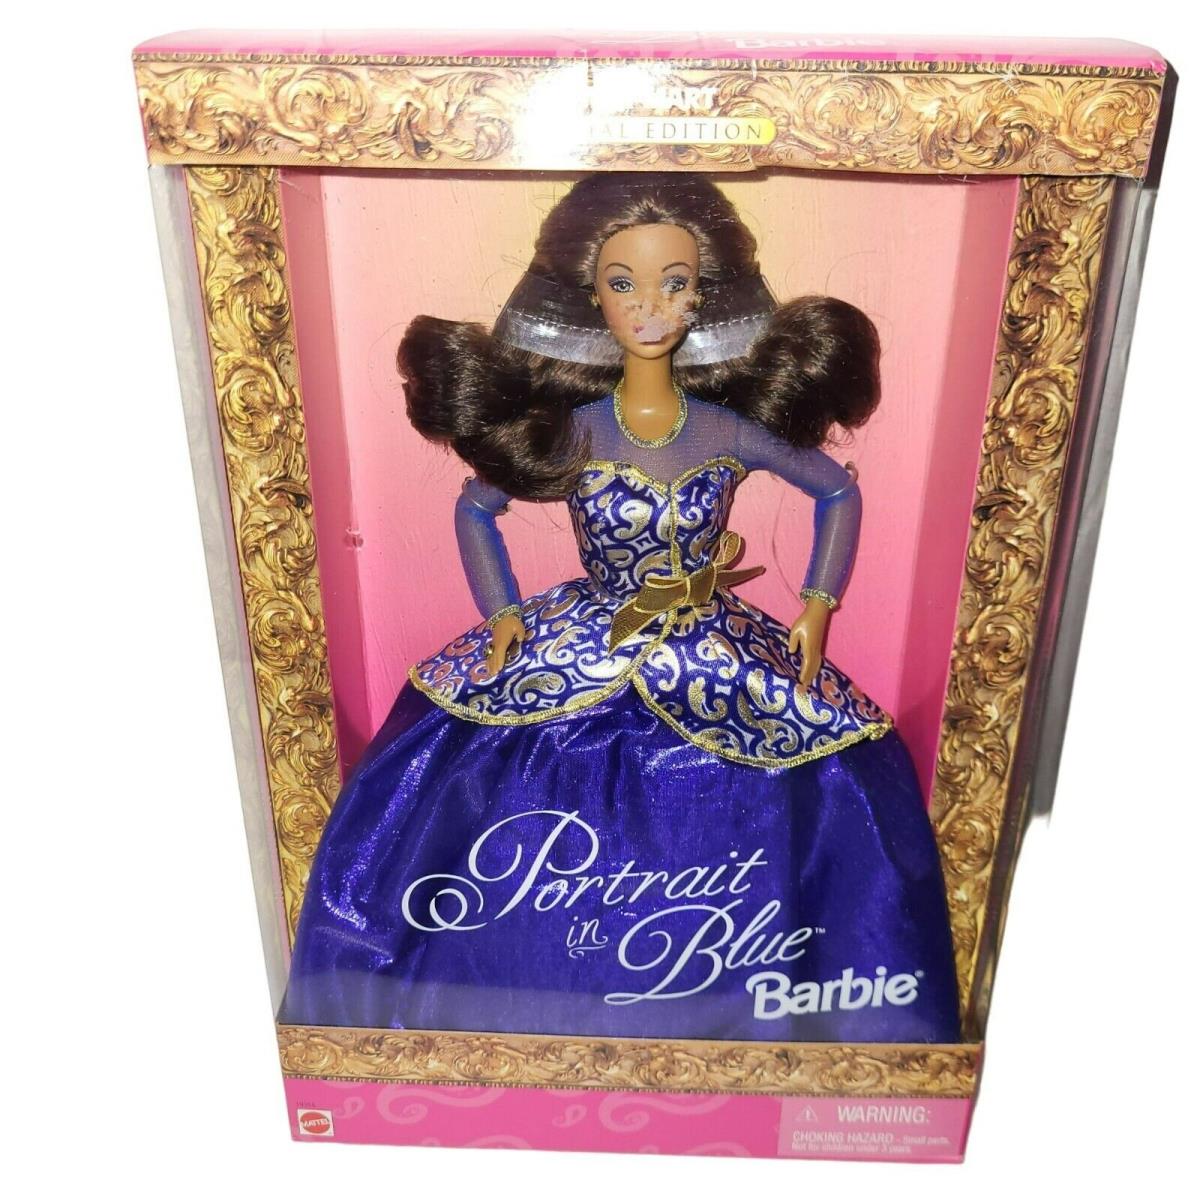 Wal Mart Special Edition 1997 Mattel African-american Barbie Portrait in Blue